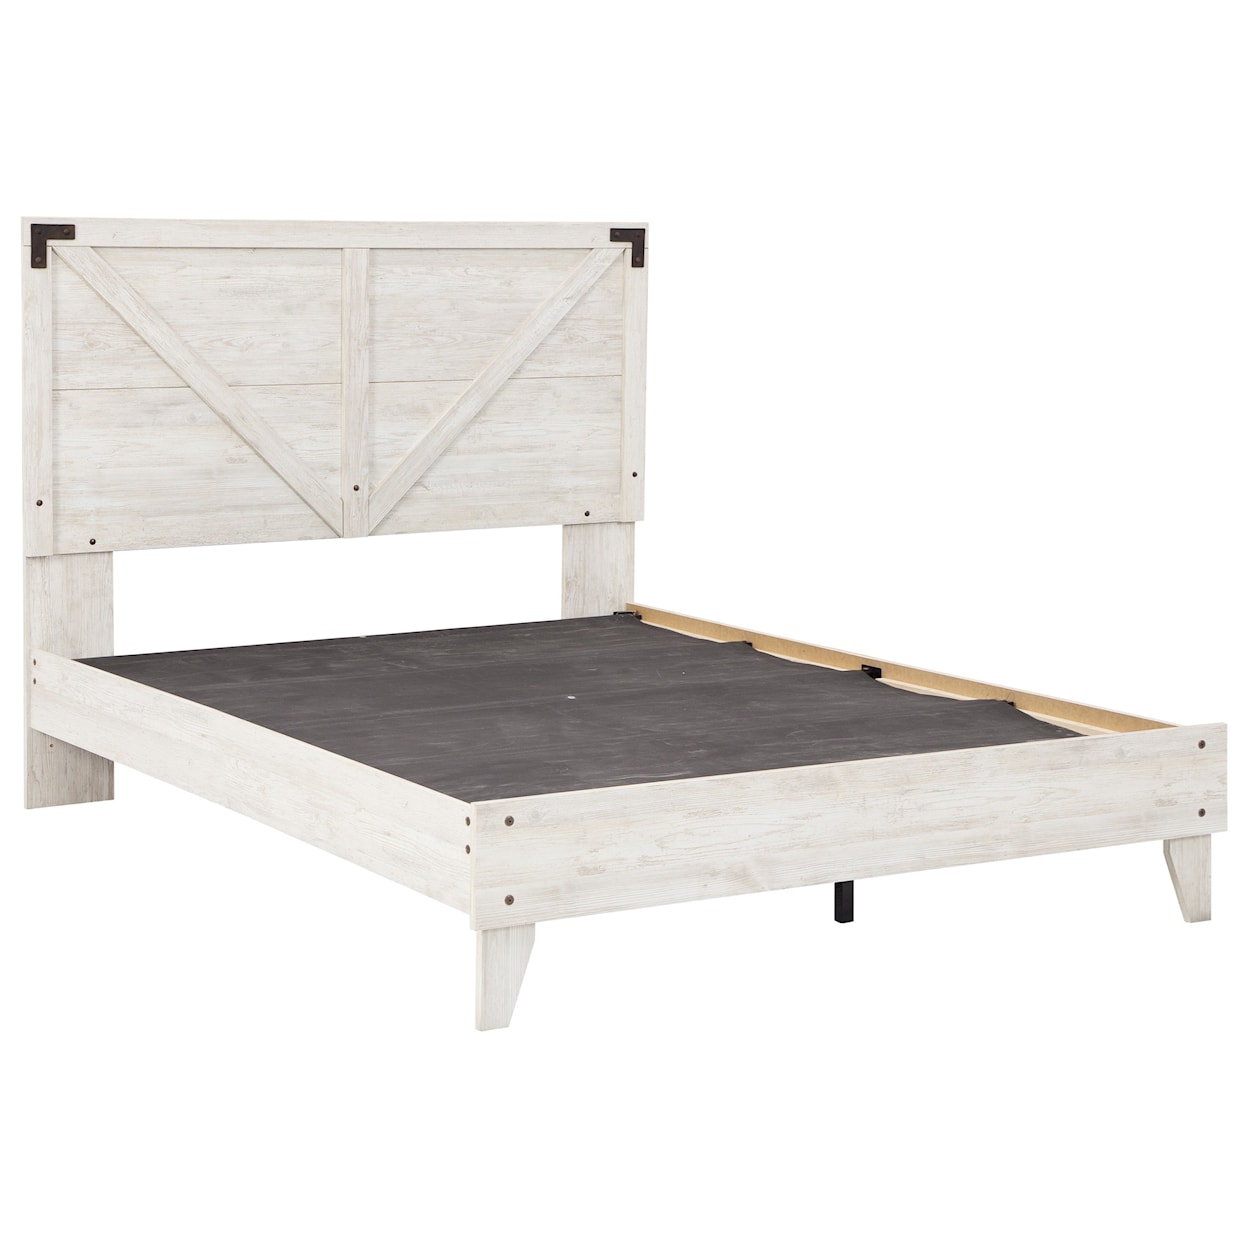 Signature Design by Ashley Shawburn Queen Platform Bed with Panel Headboard